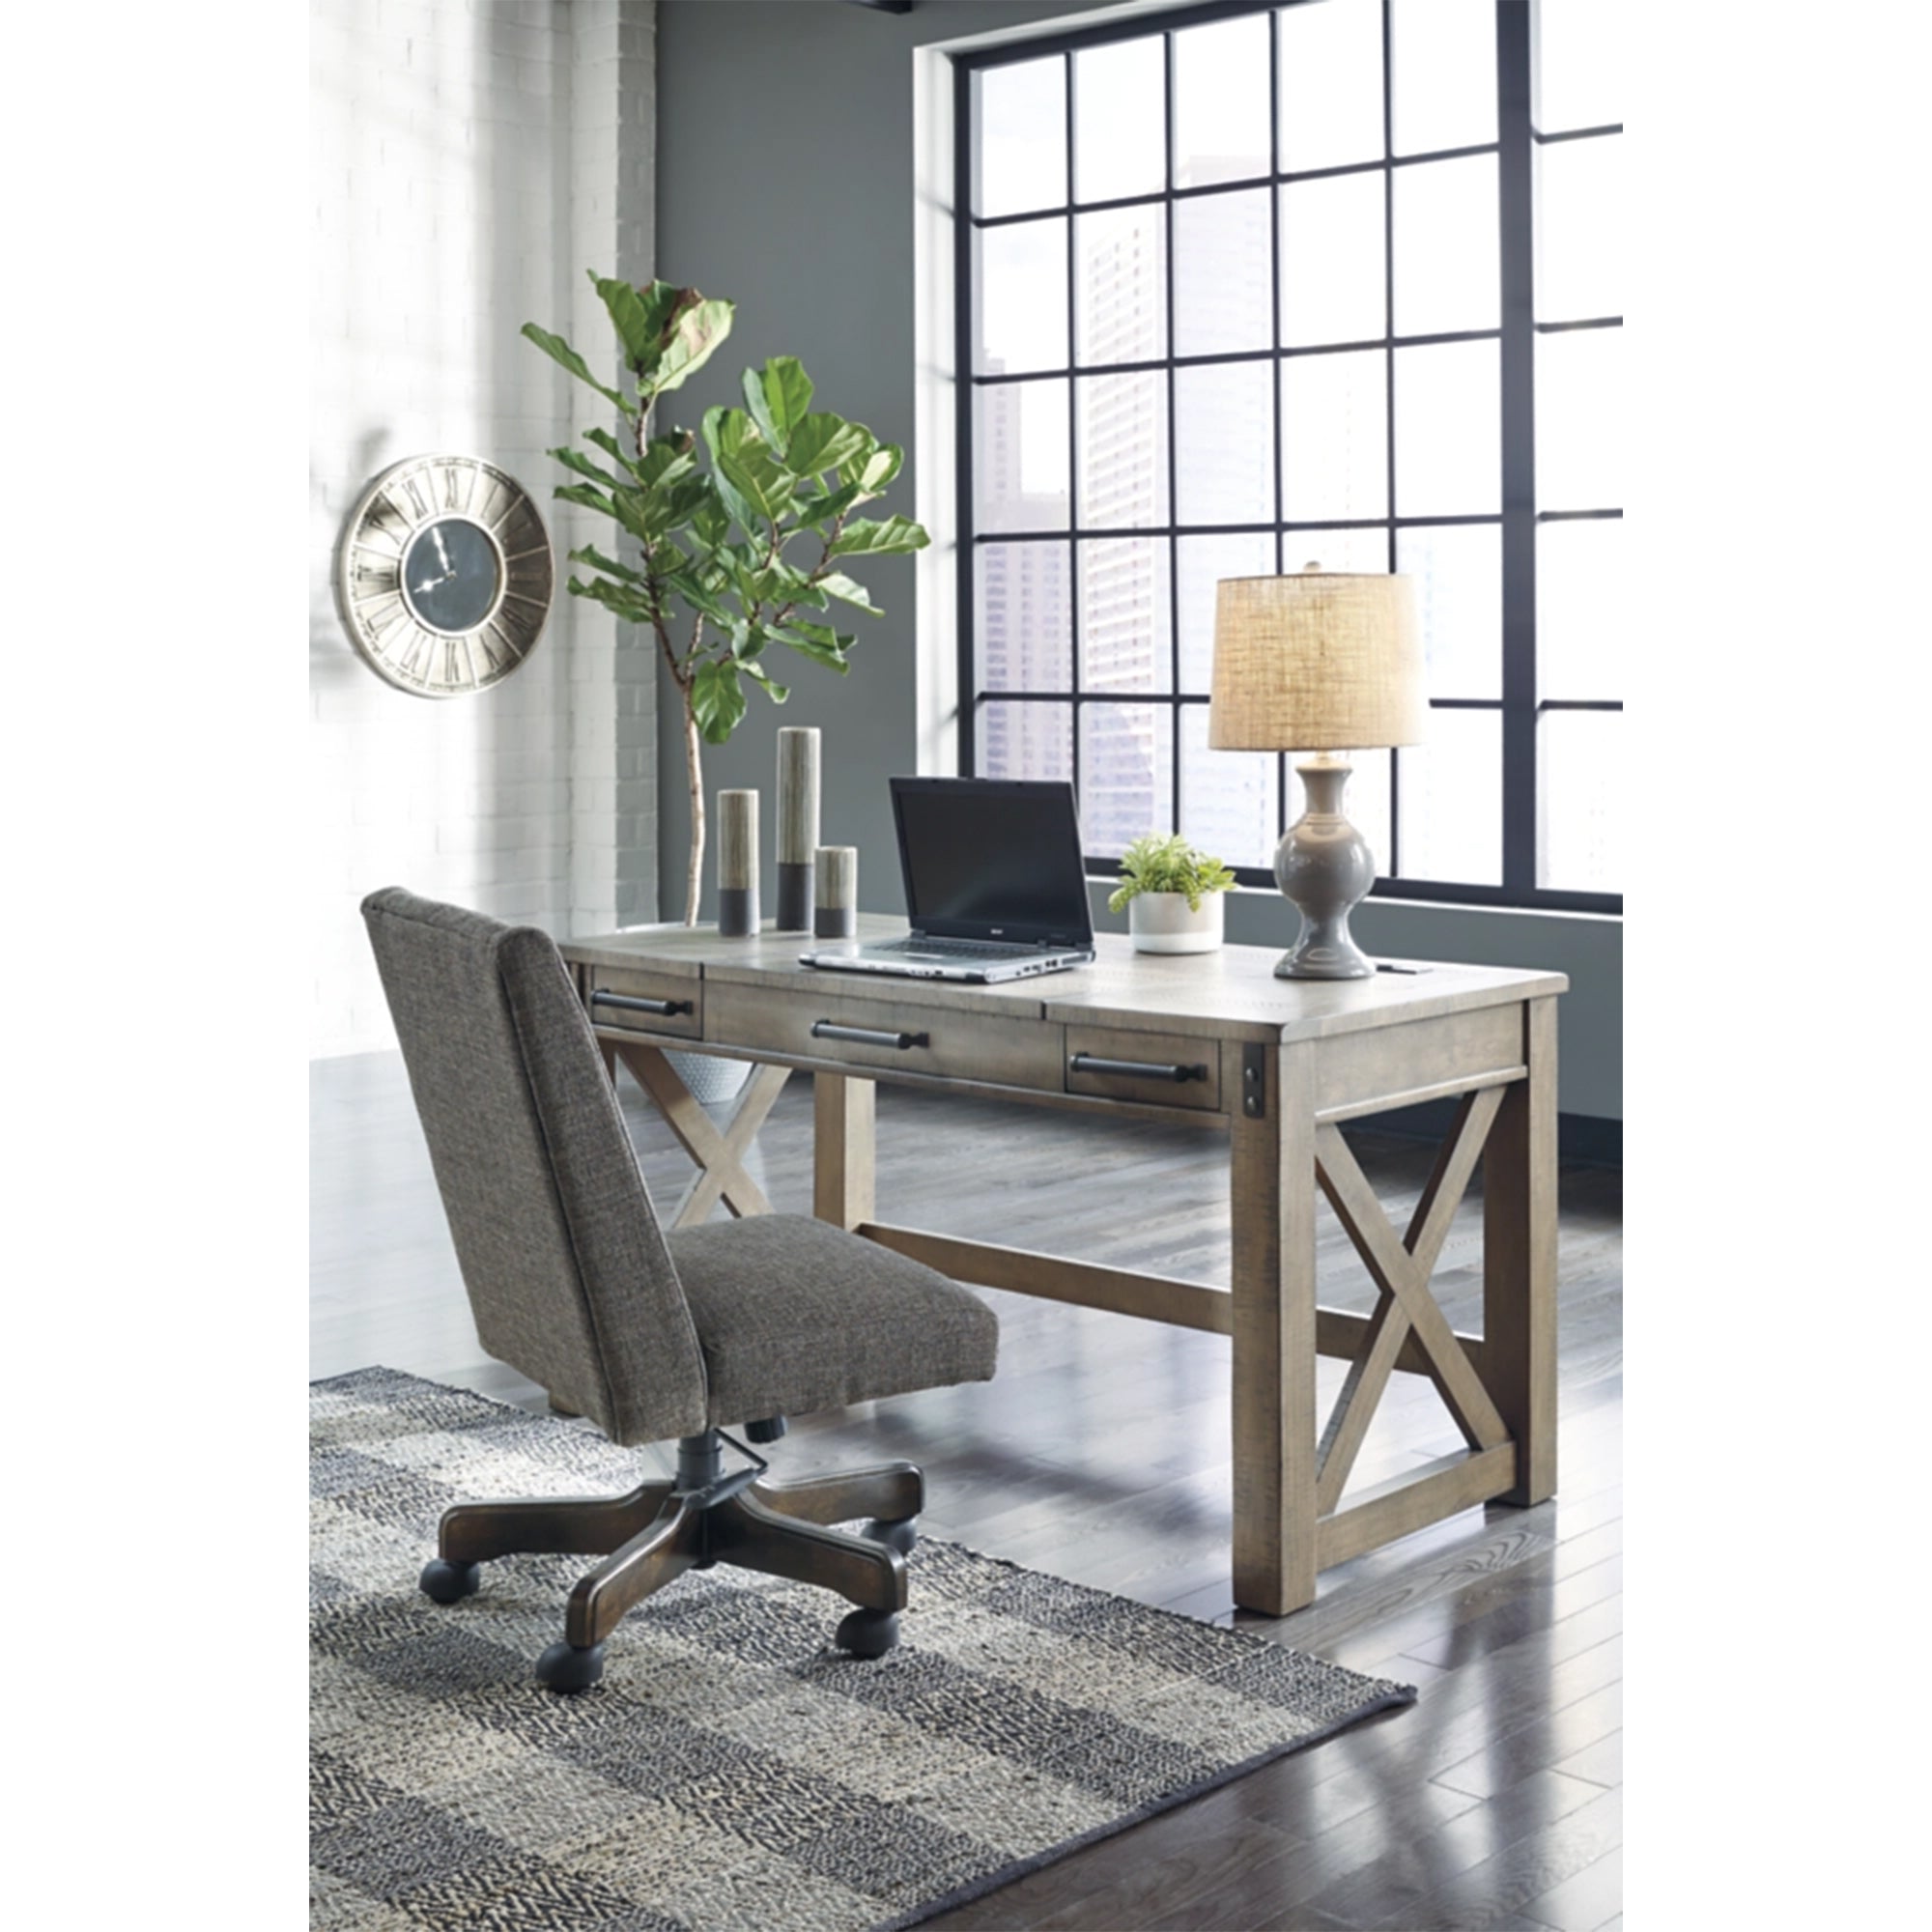 Rustic Home Office Lift Top Desk - Gray